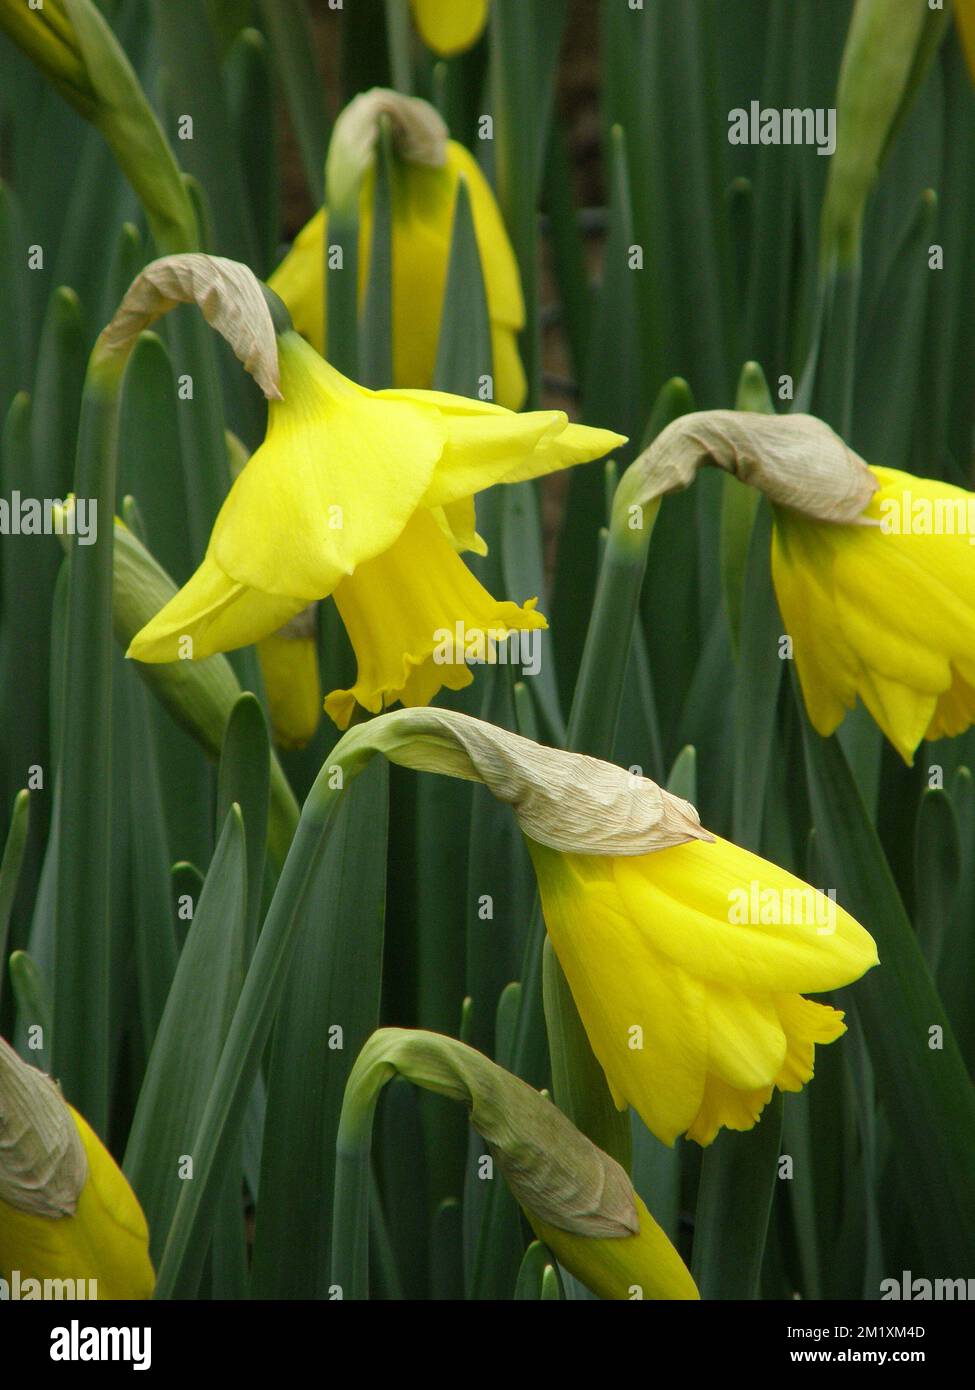 Yellow Trumpet daffodils (Narcissus) Accent bloom in a garden in March Stock Photo